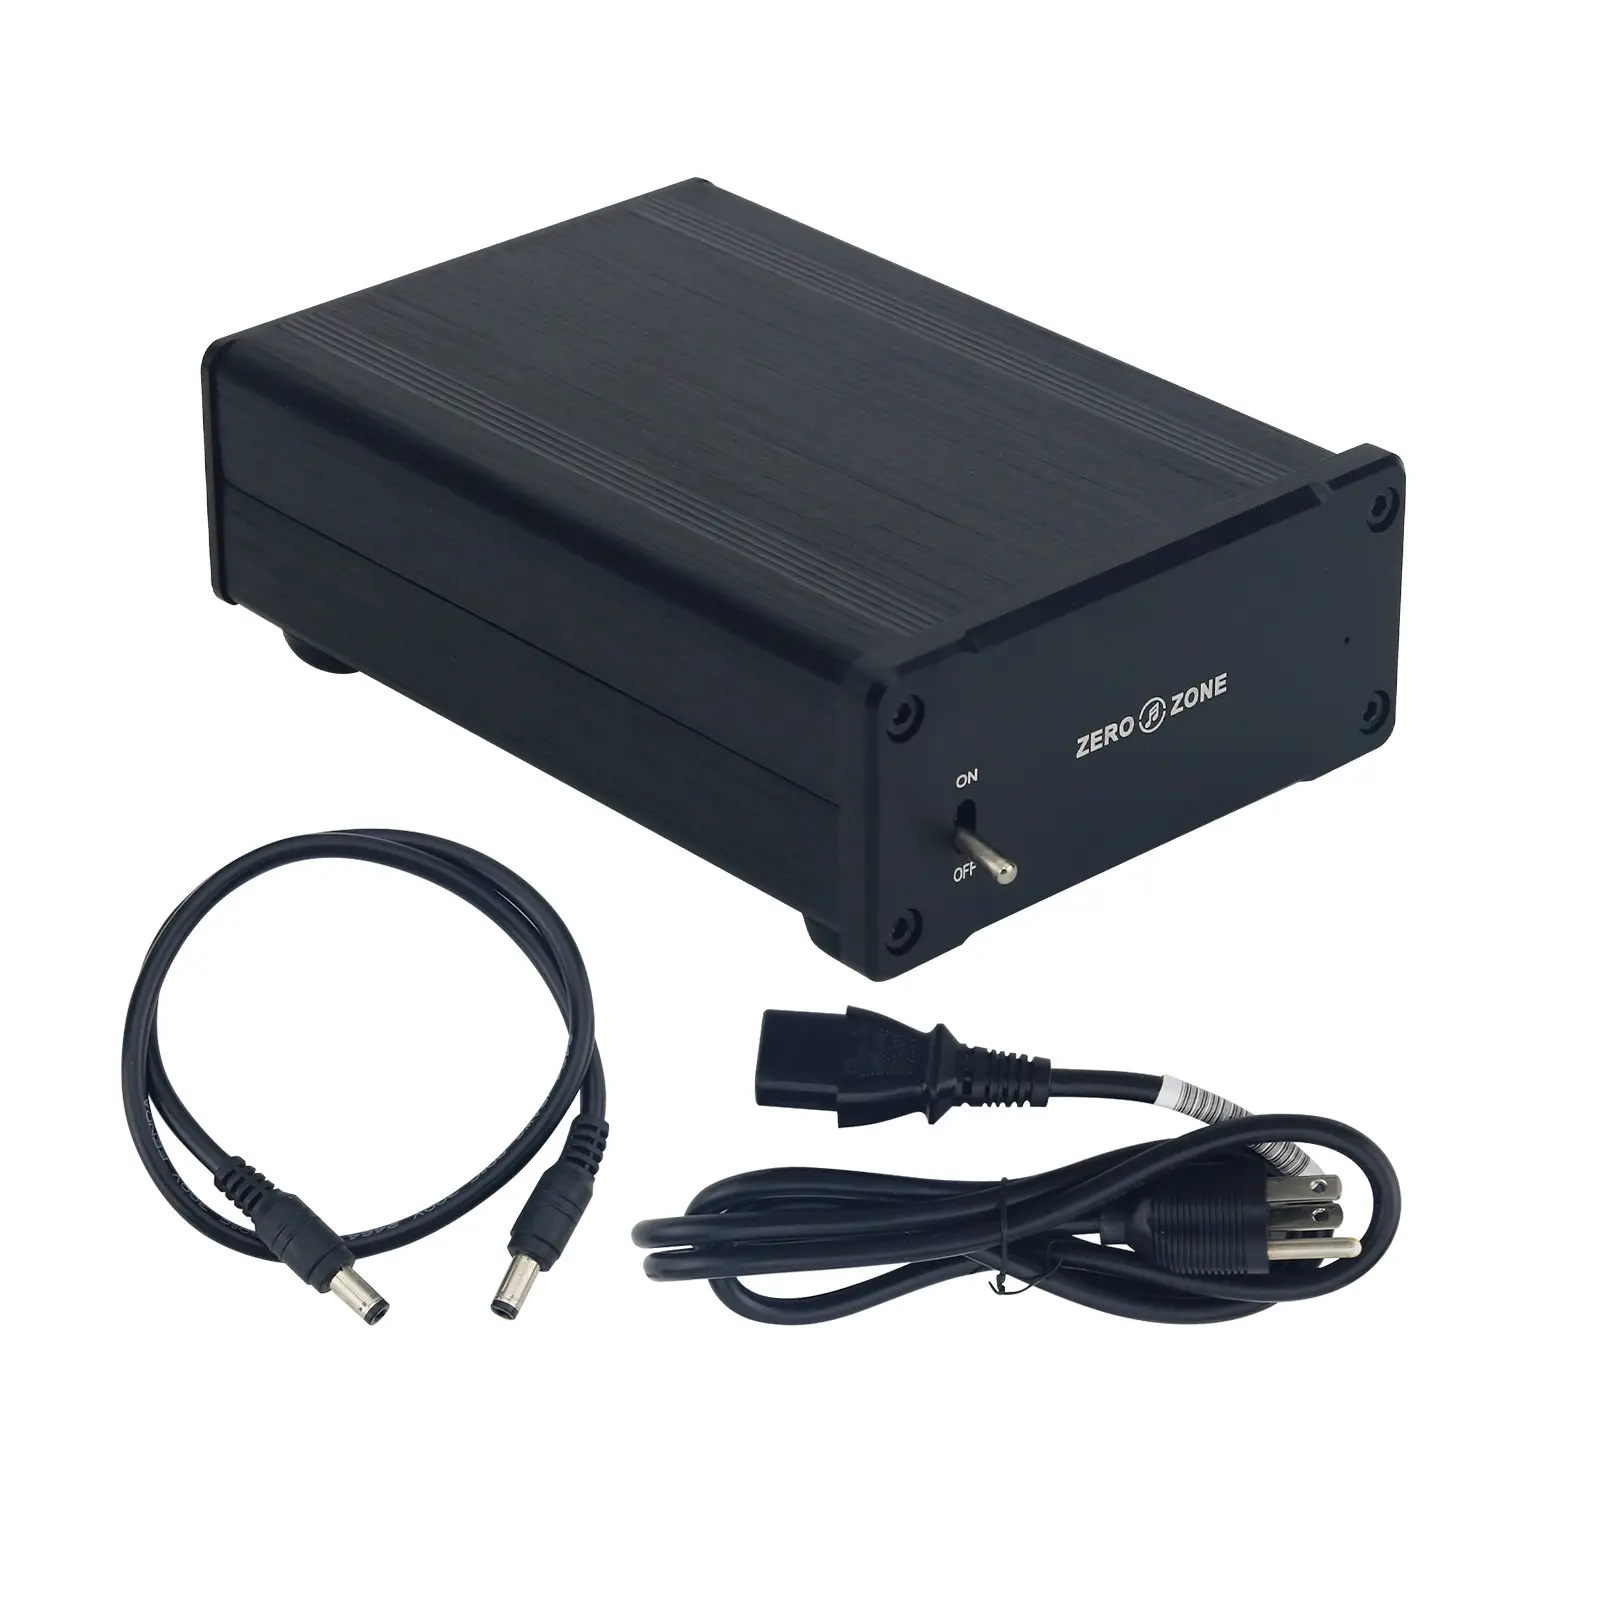 15W-LPS Linear Power Supply 15VA 5V-24V Optional with Power Cord For USB Interface DC Power Supply